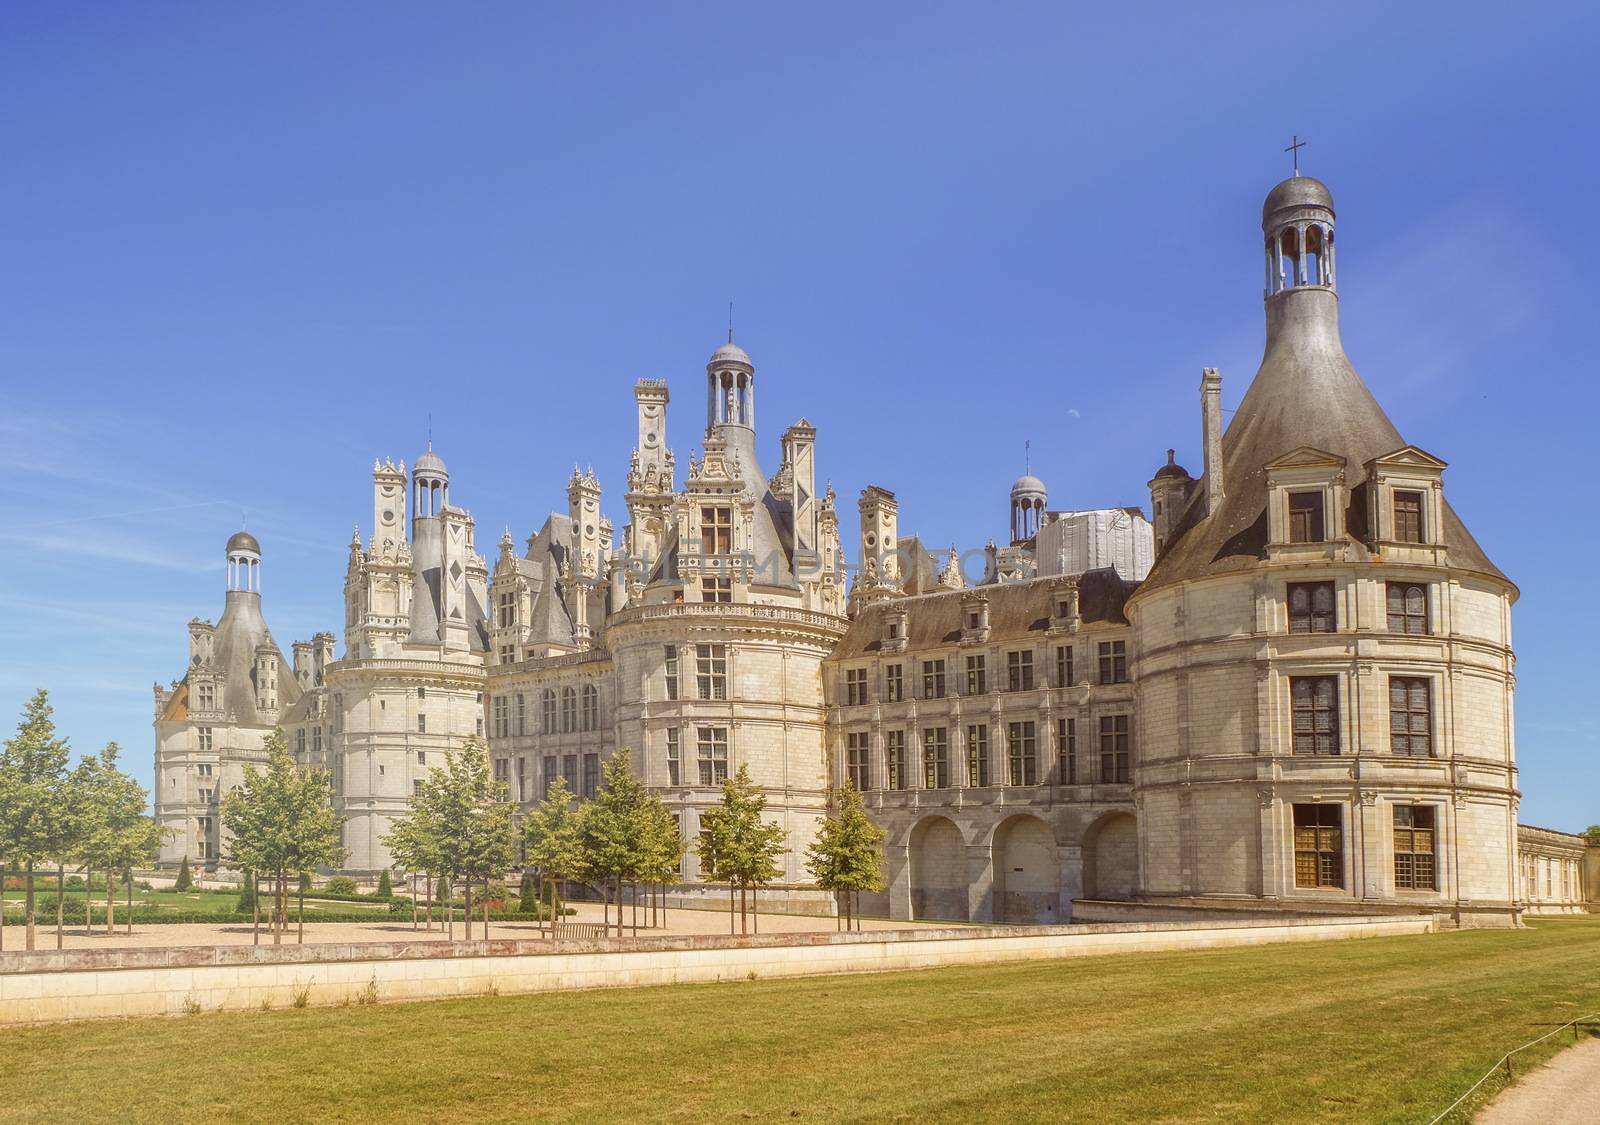 Famous Chambord castle in Loire valley, France by Elenaphotos21